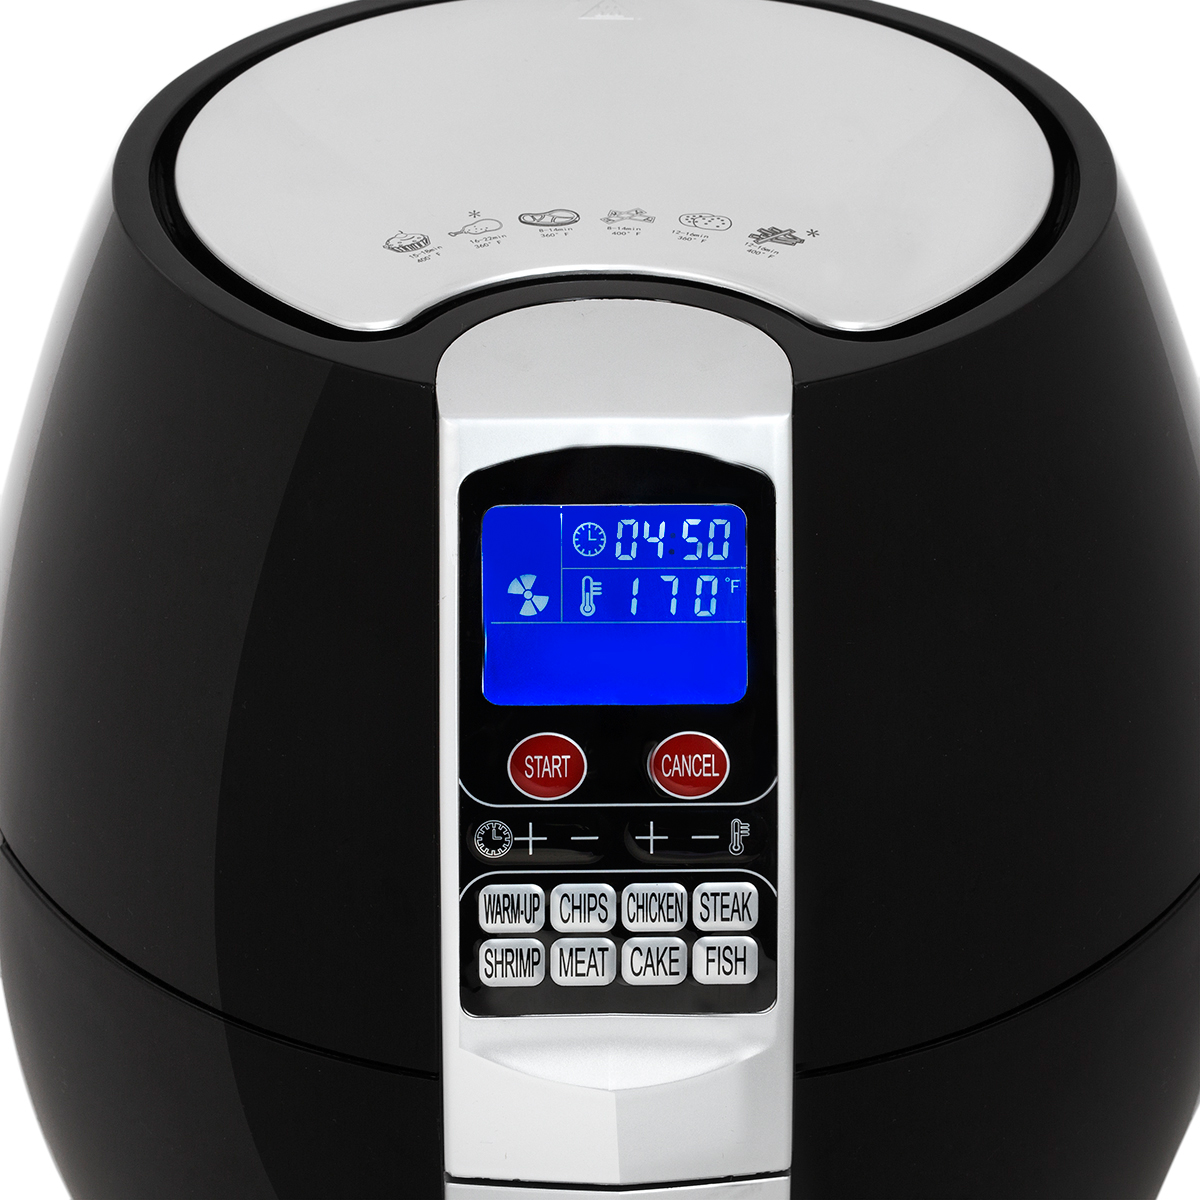 XtremepowerUS 3.7QT 1500W Electric Air Fryer Cooker 8 Cooking Menu Setting Digital Display, Black - image 3 of 4